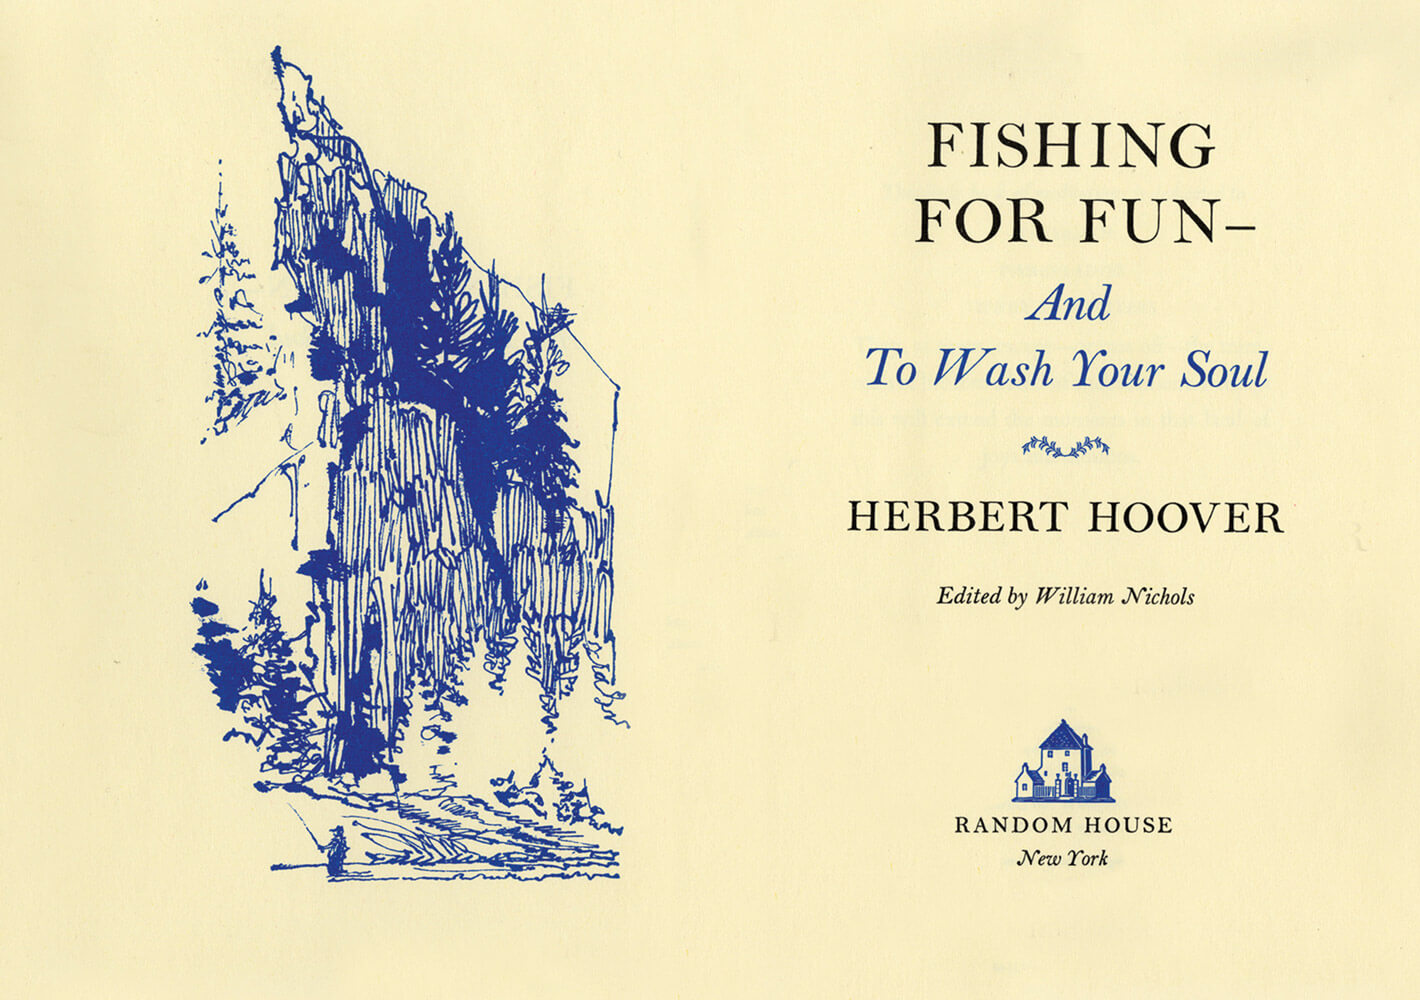 Page from Herbert Hoover’s Fishing for Fun, 1963.